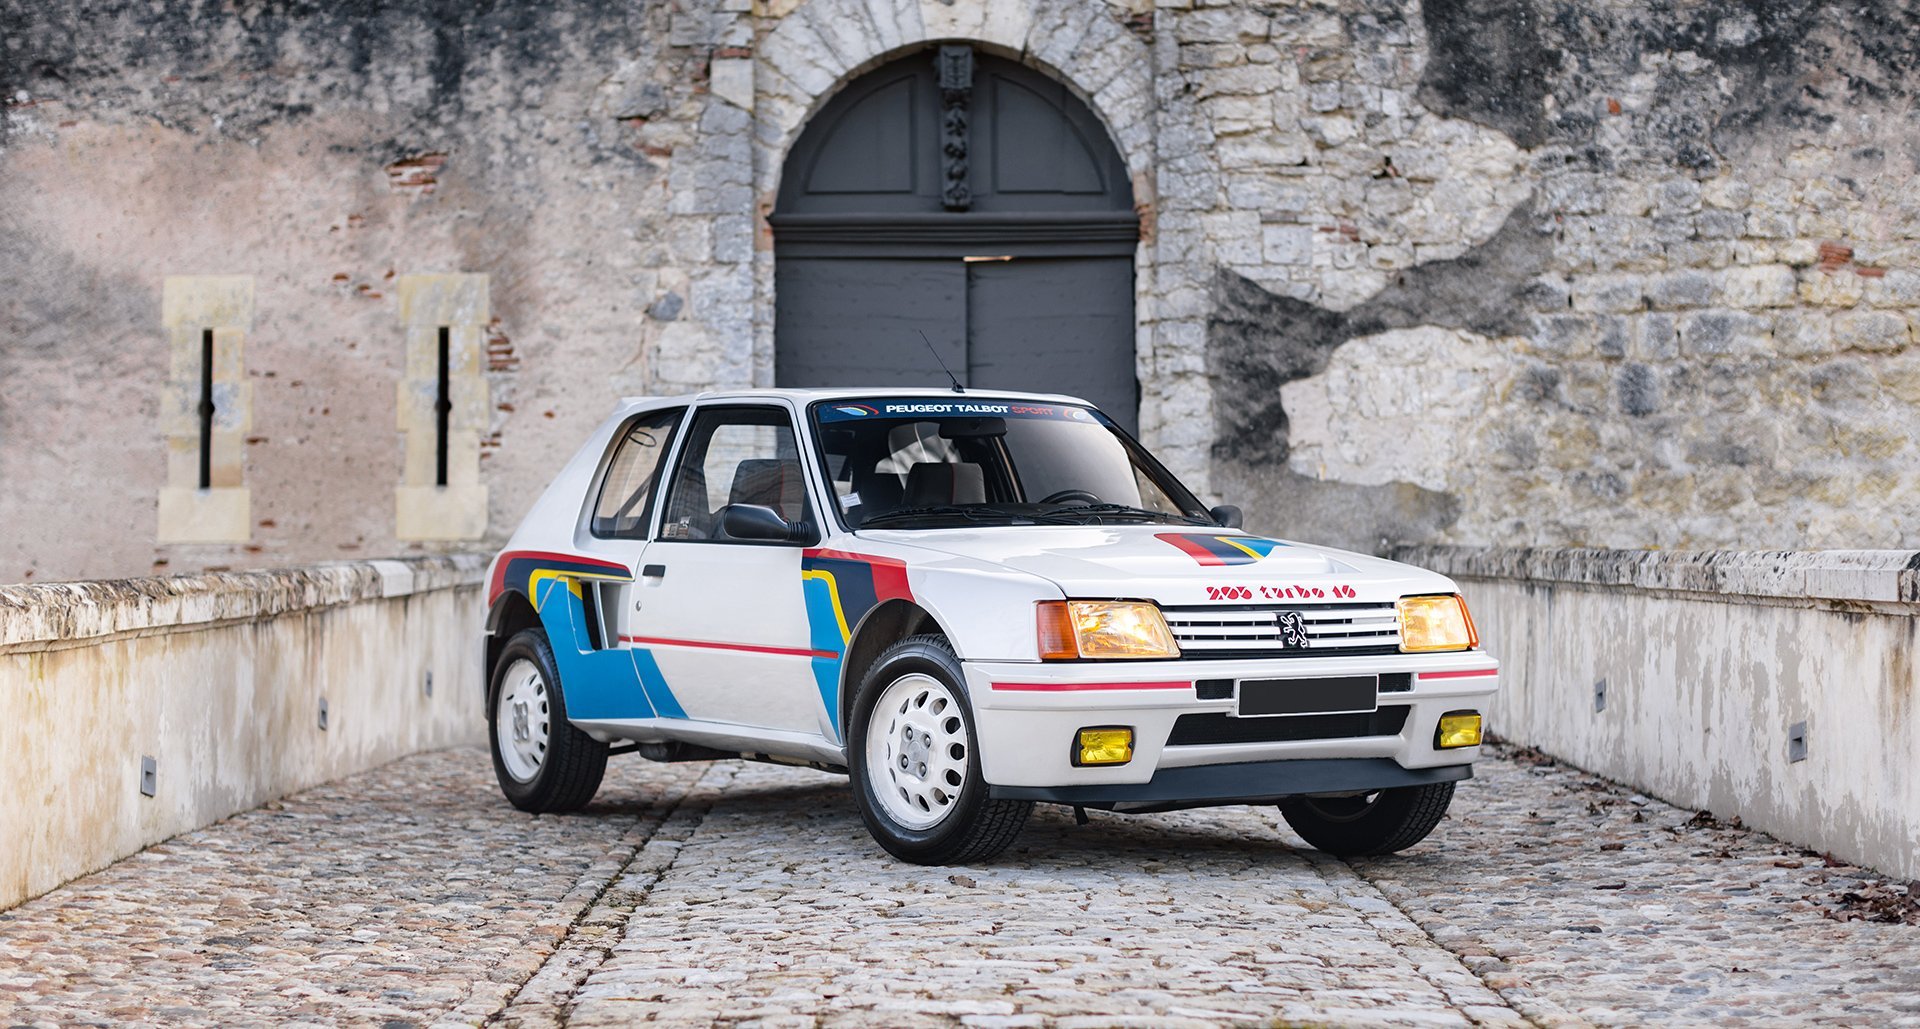 This pearl-white Peugeot 205 T16 is a street-legal rally icon